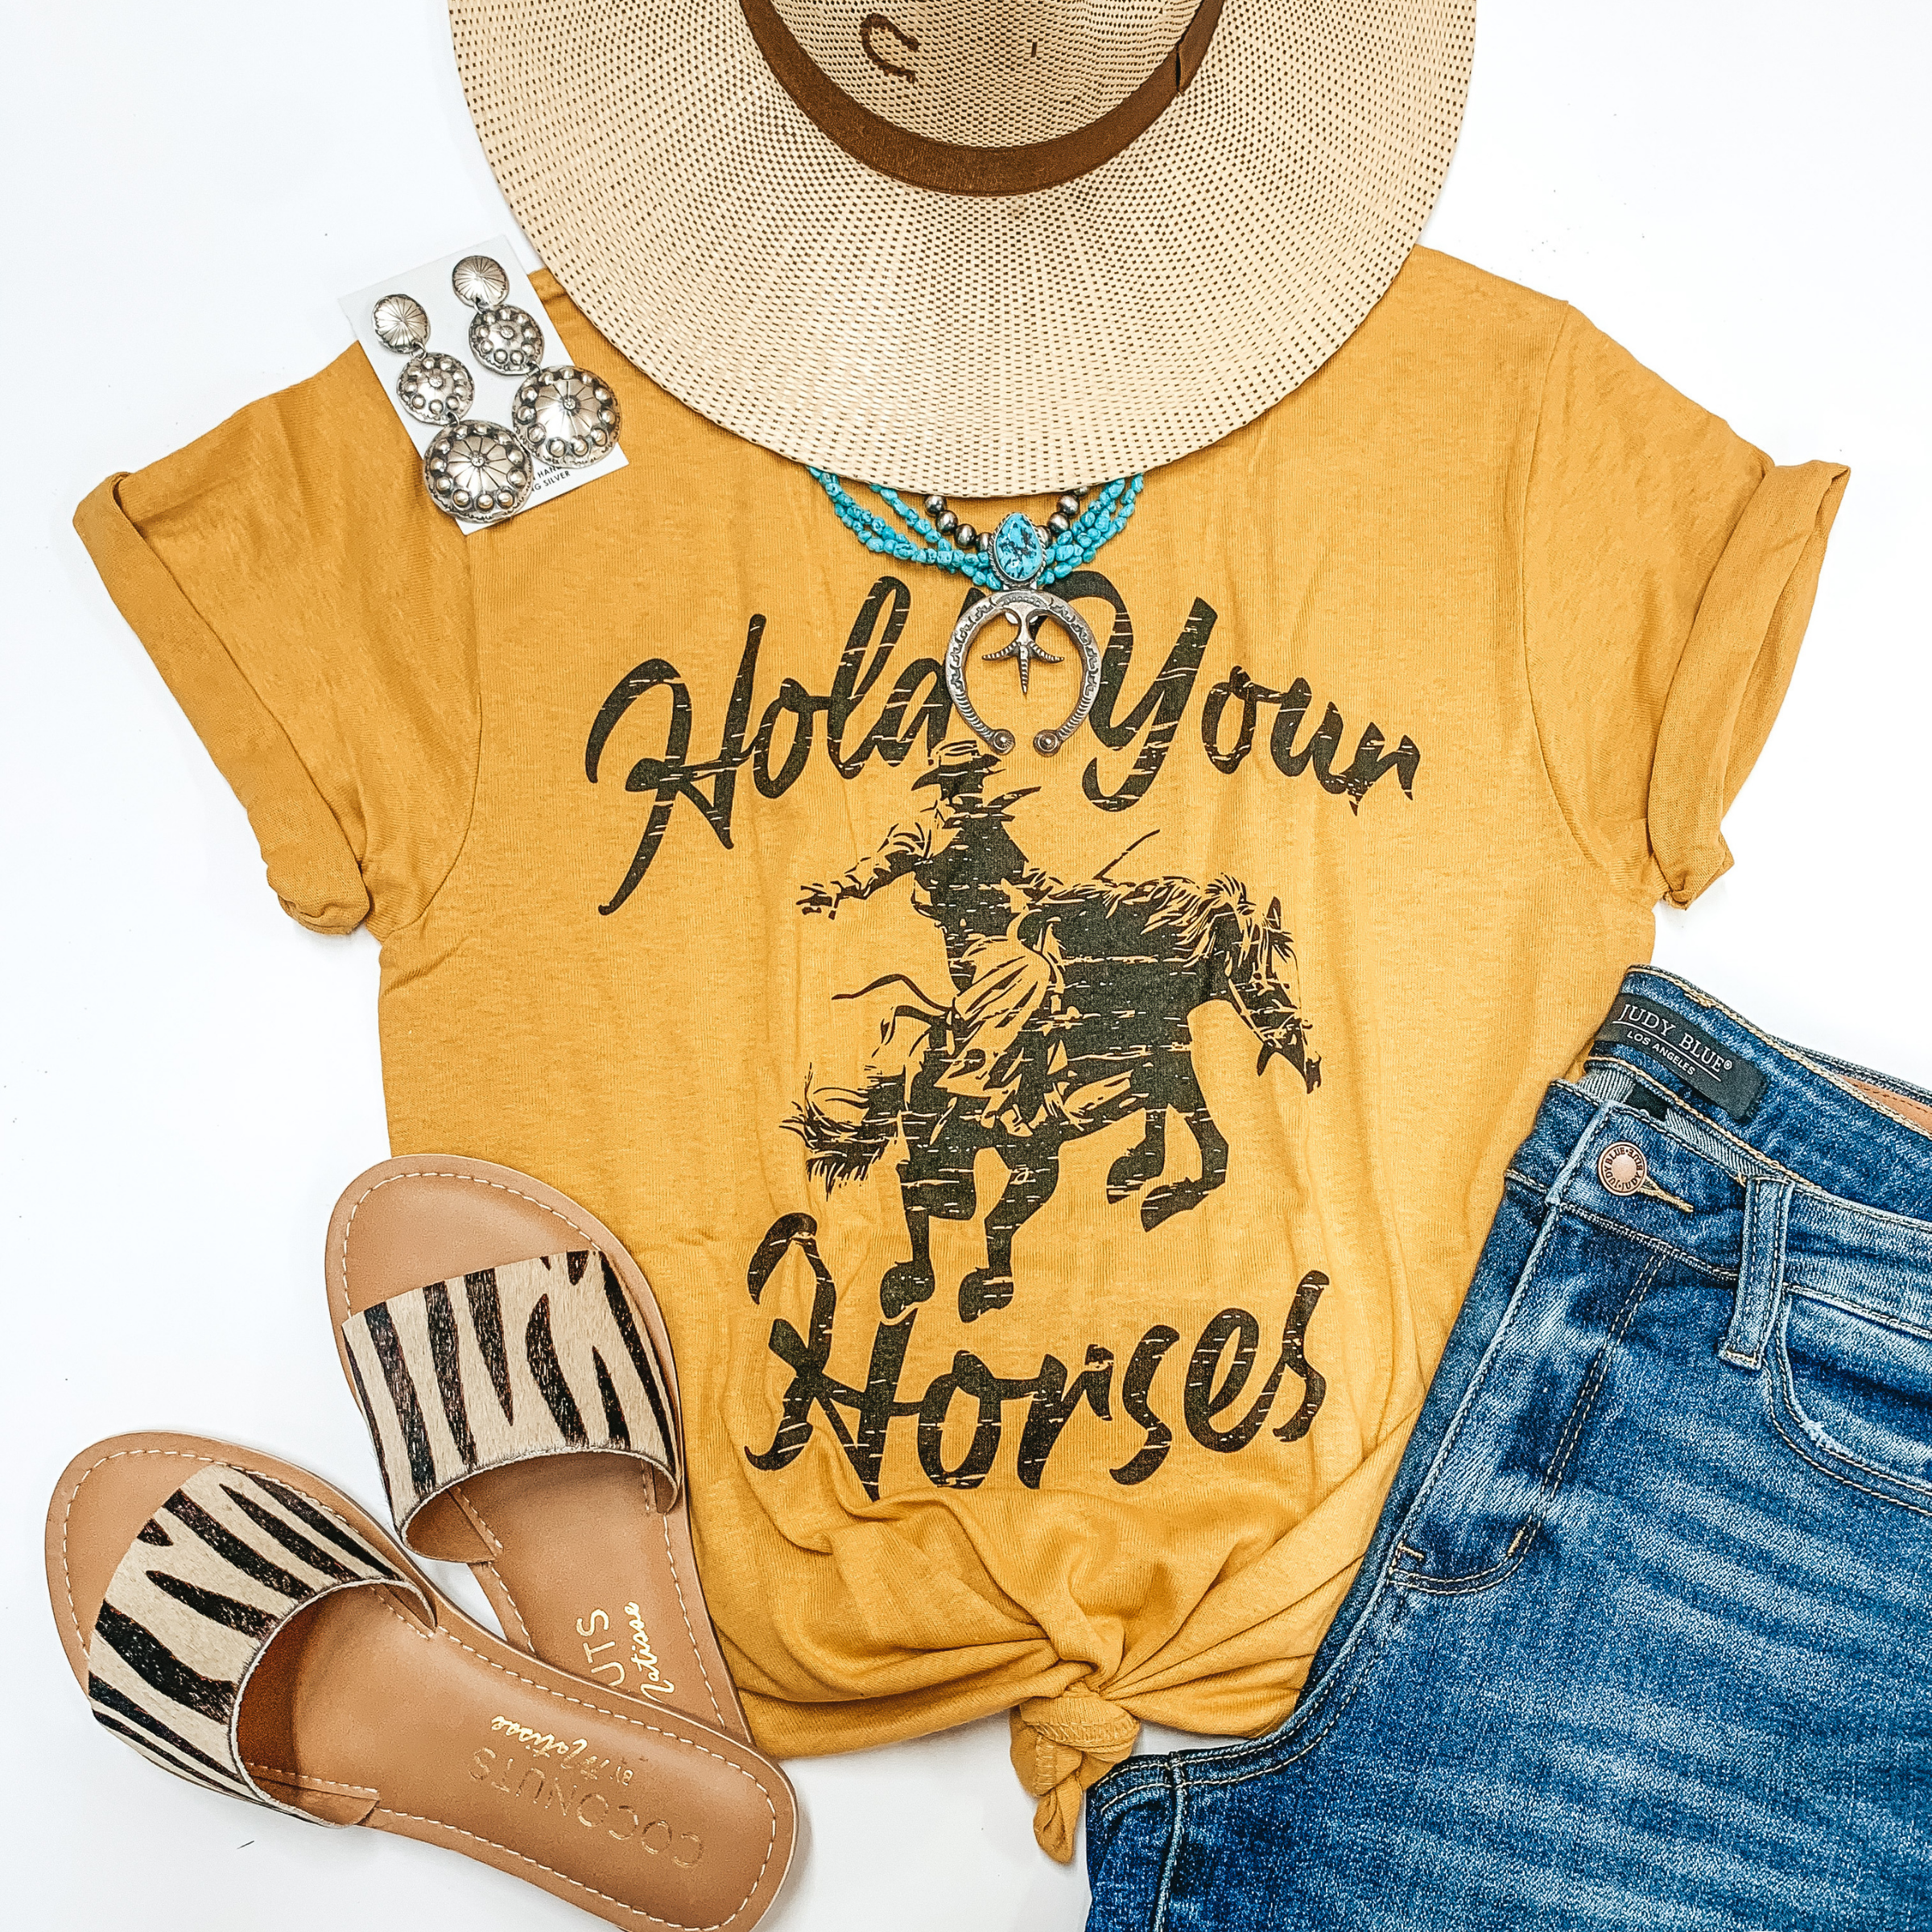 A mustard yellow graphic tee with a cowboy that says "Hold your horses." Pictured with sandals, denim shorts, and genuine Navajo jewelry.